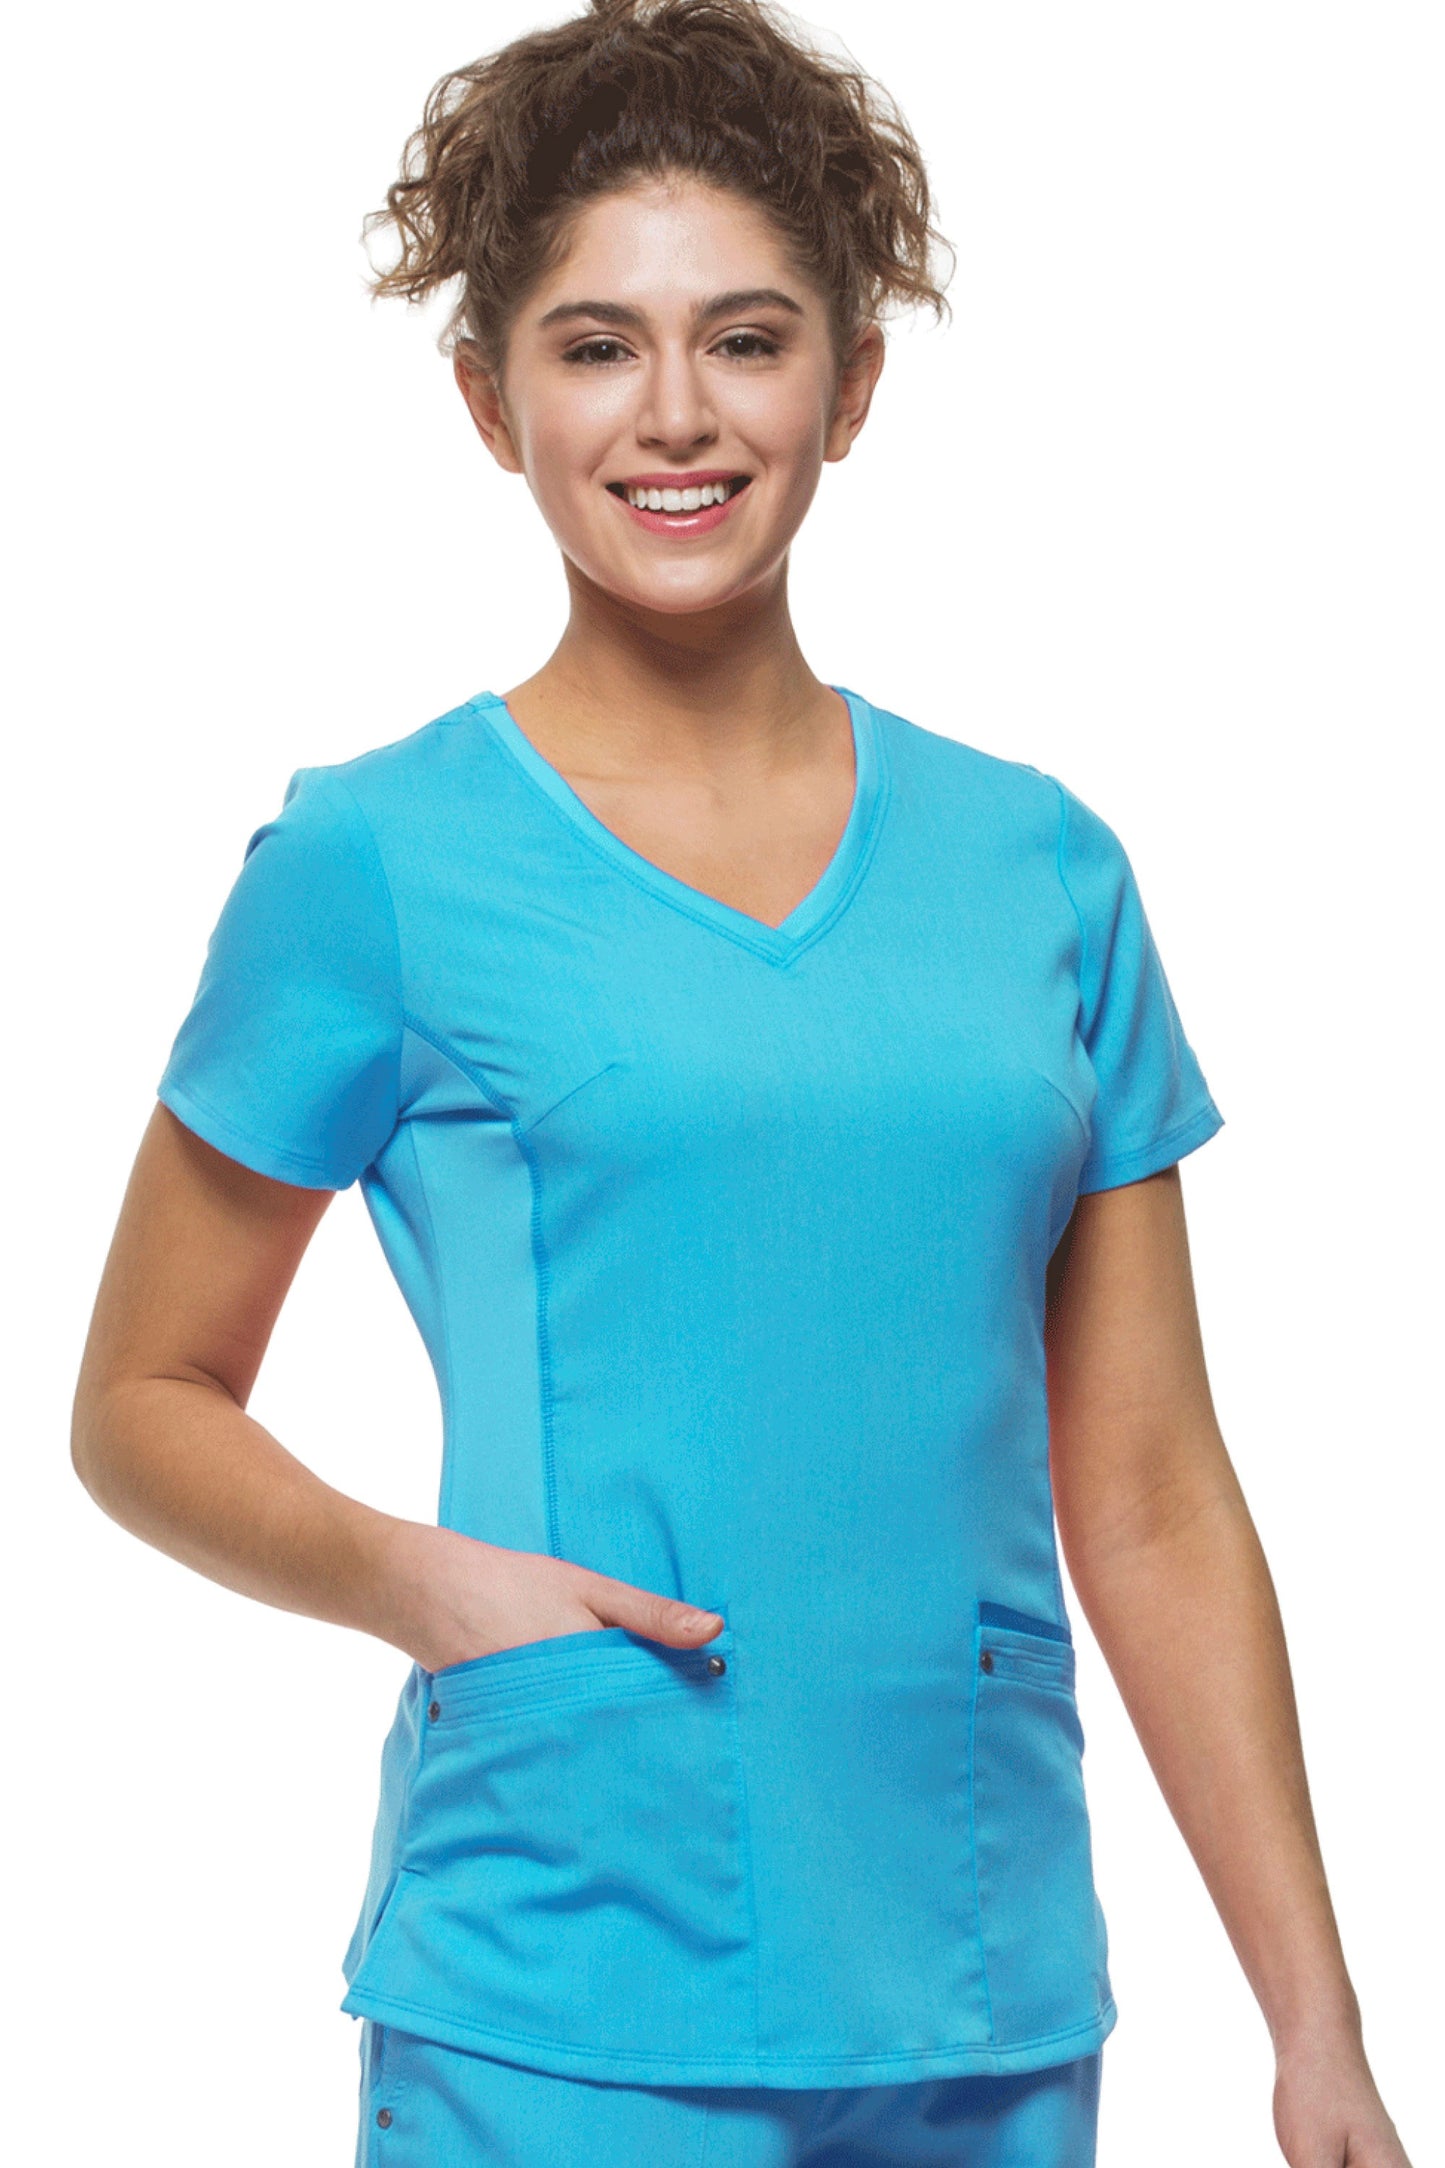 Healing Hands Purple Label Juliet Scrub Top in Turquoise at Parker's Clothing and Shoes.